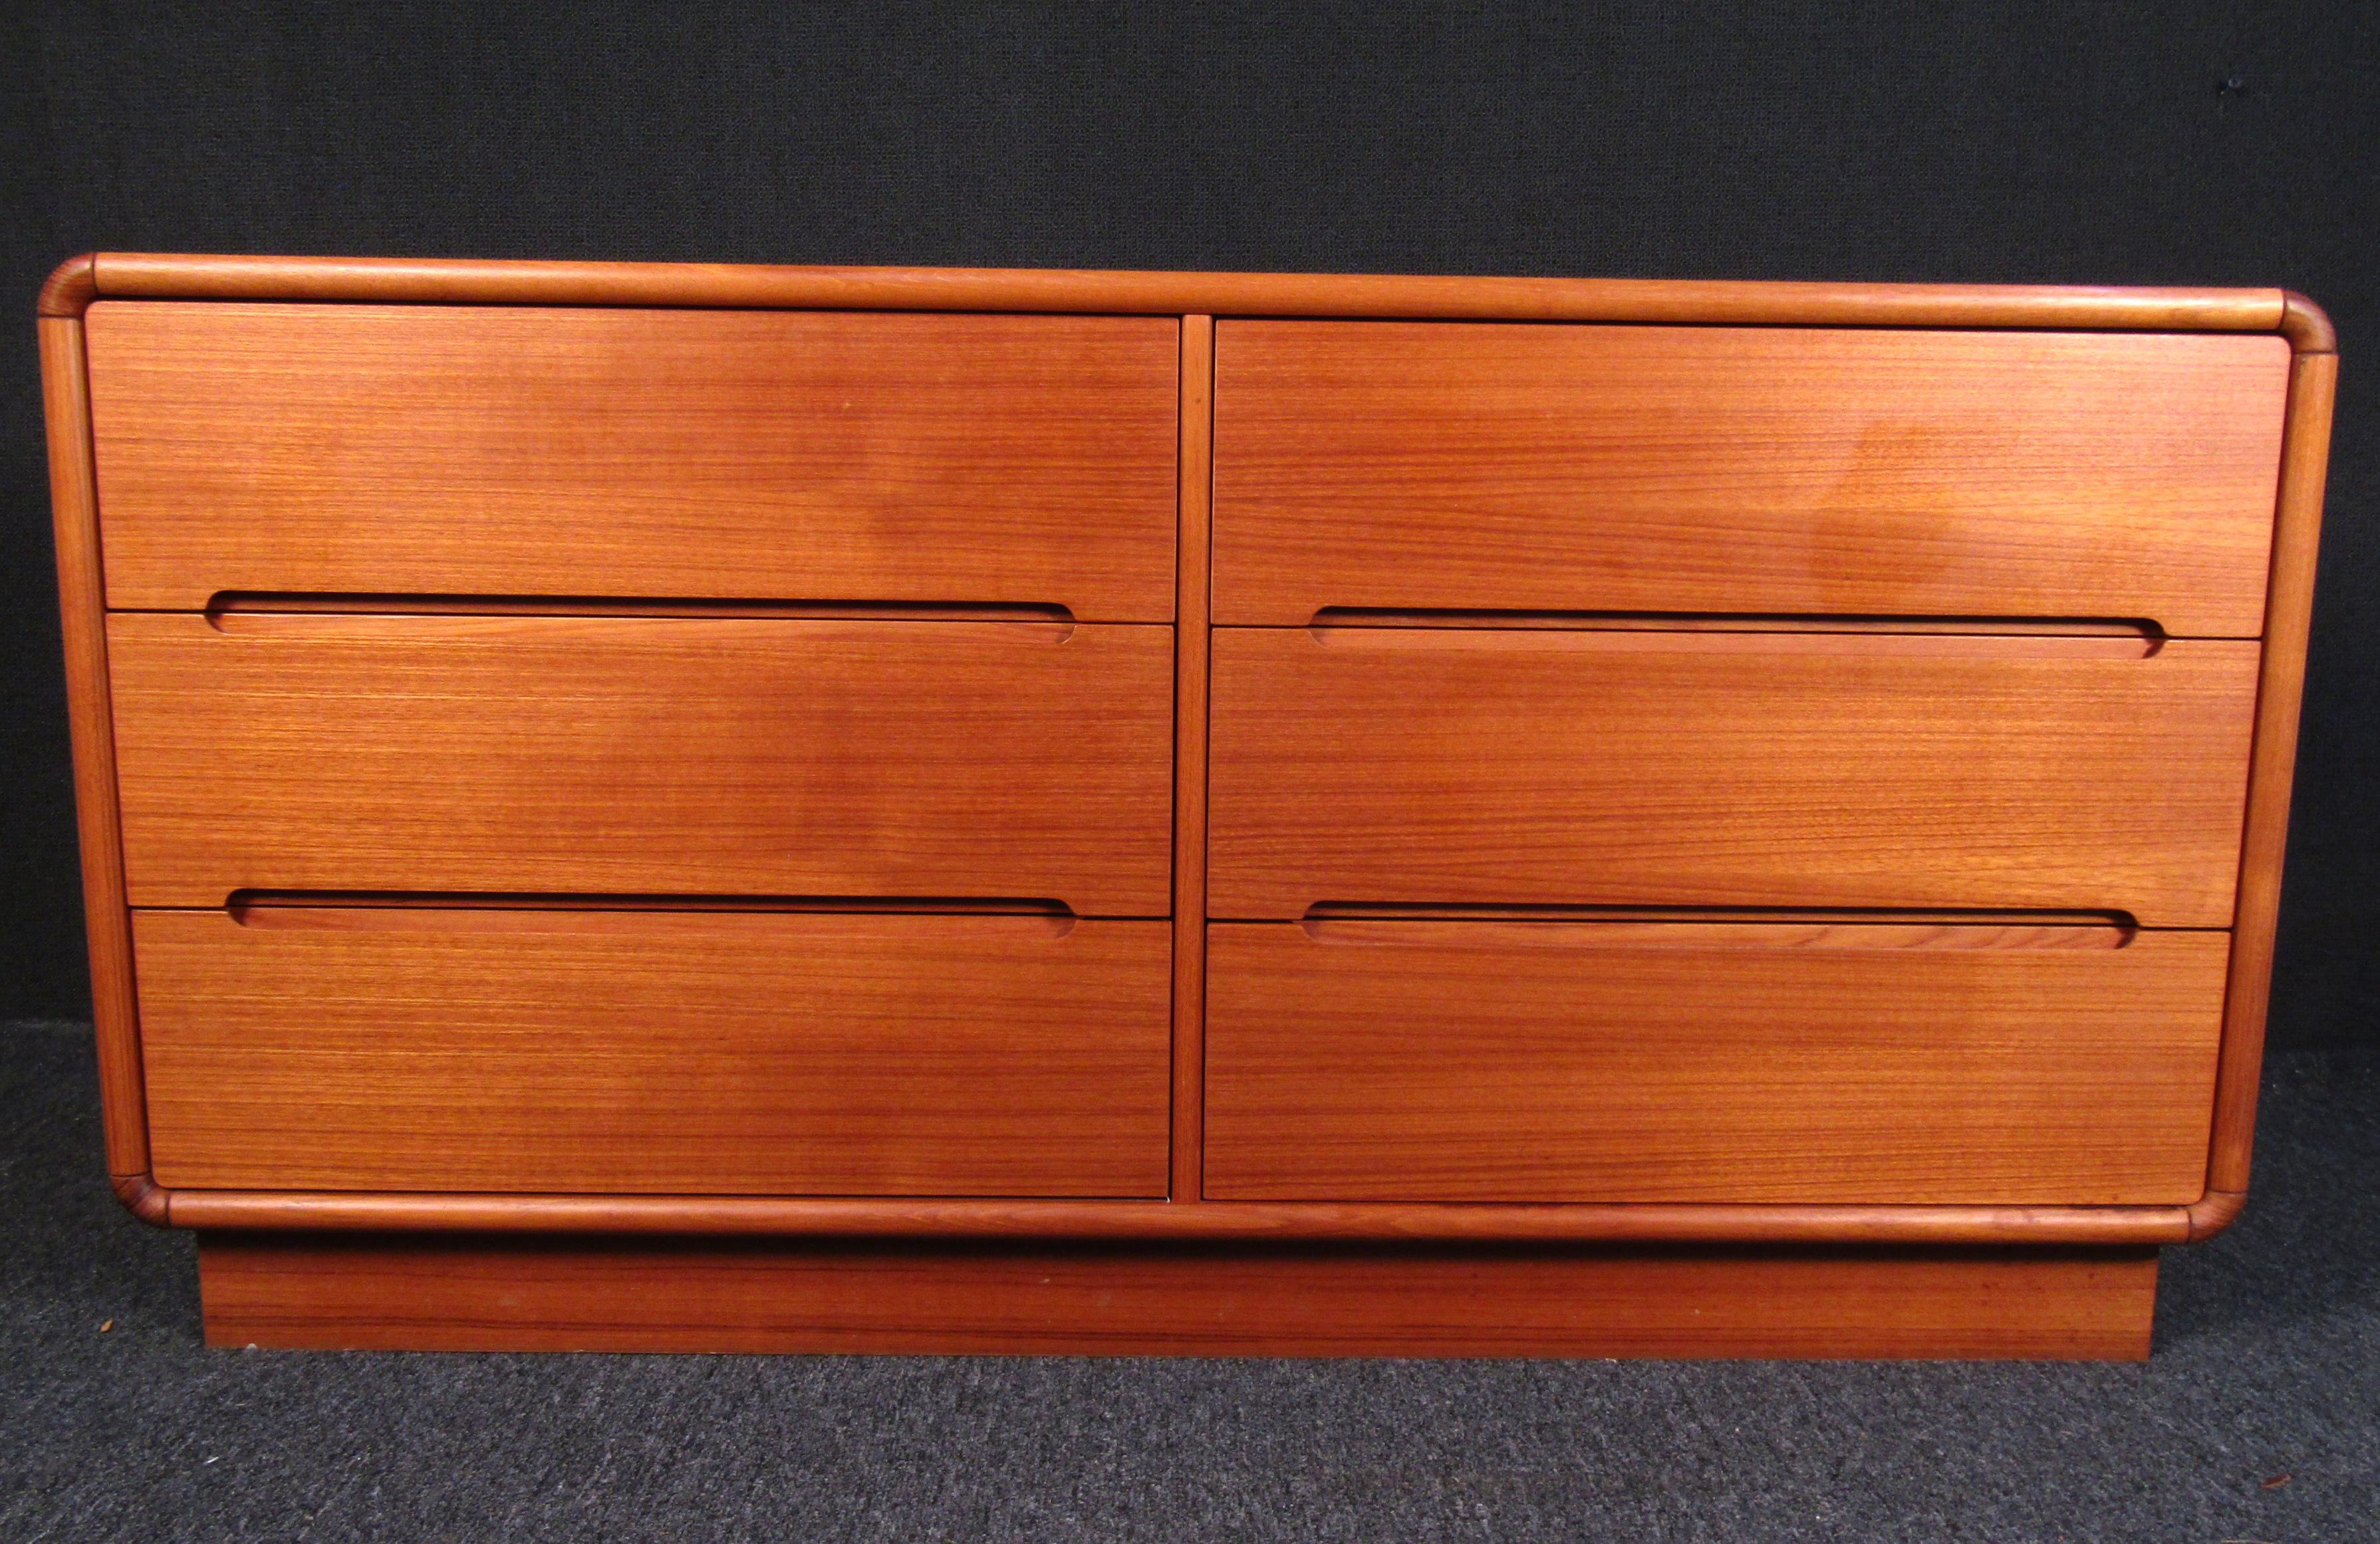 Danish teak dresser with 6 drawers and finished back. This piece features a gorgeous curved-edge design with stylish recessed drawer pulls. Cross-grain corner trim highlights the natural wood colors. Perfect addition for any home. 

Please confirm